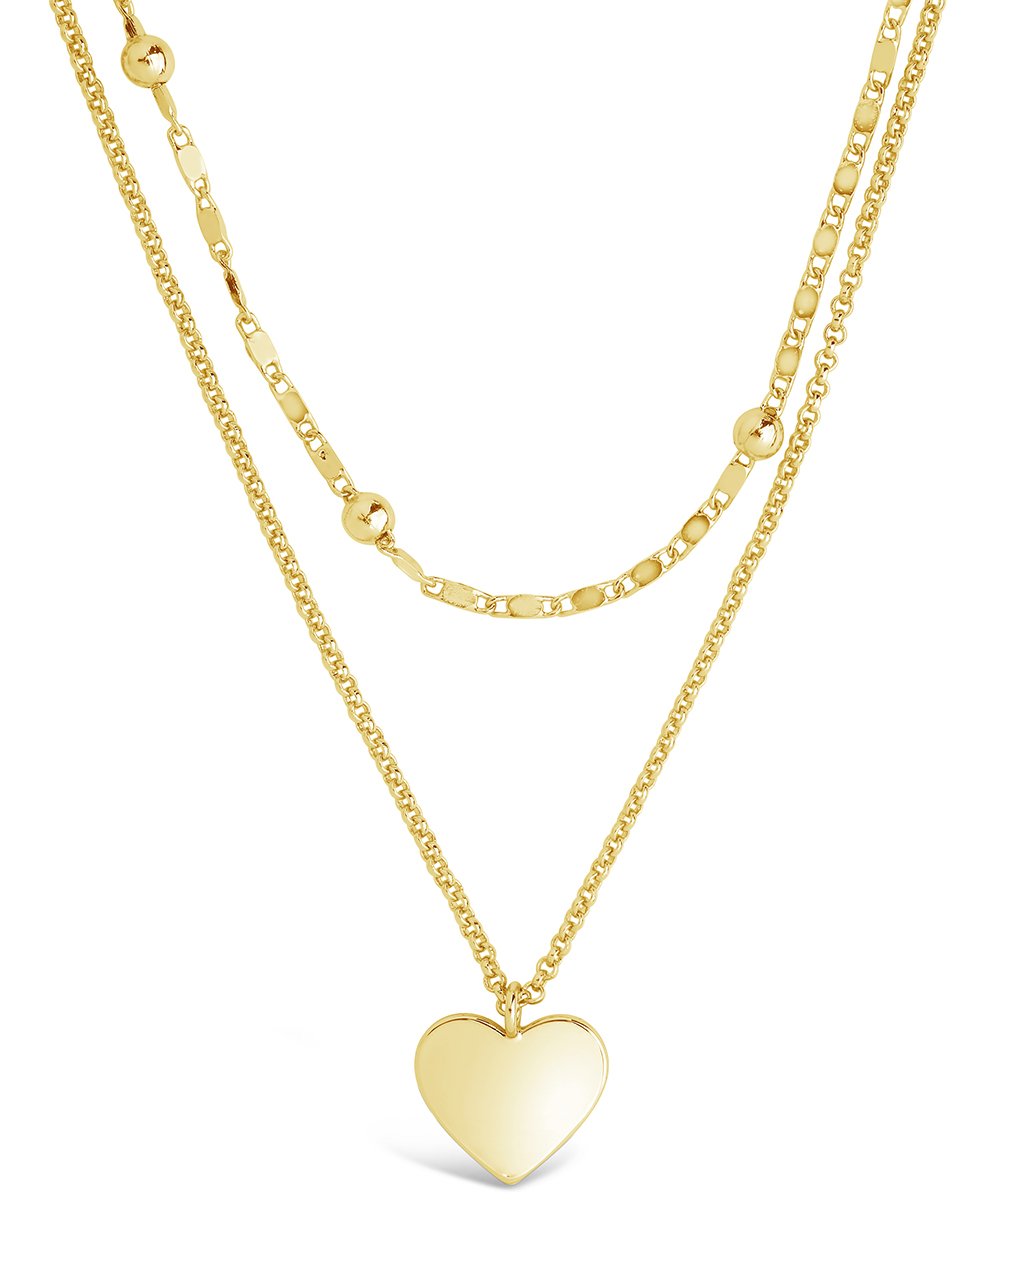 Beaded Chain & Heart Charm Layered Necklace Necklace Sterling Forever Gold 